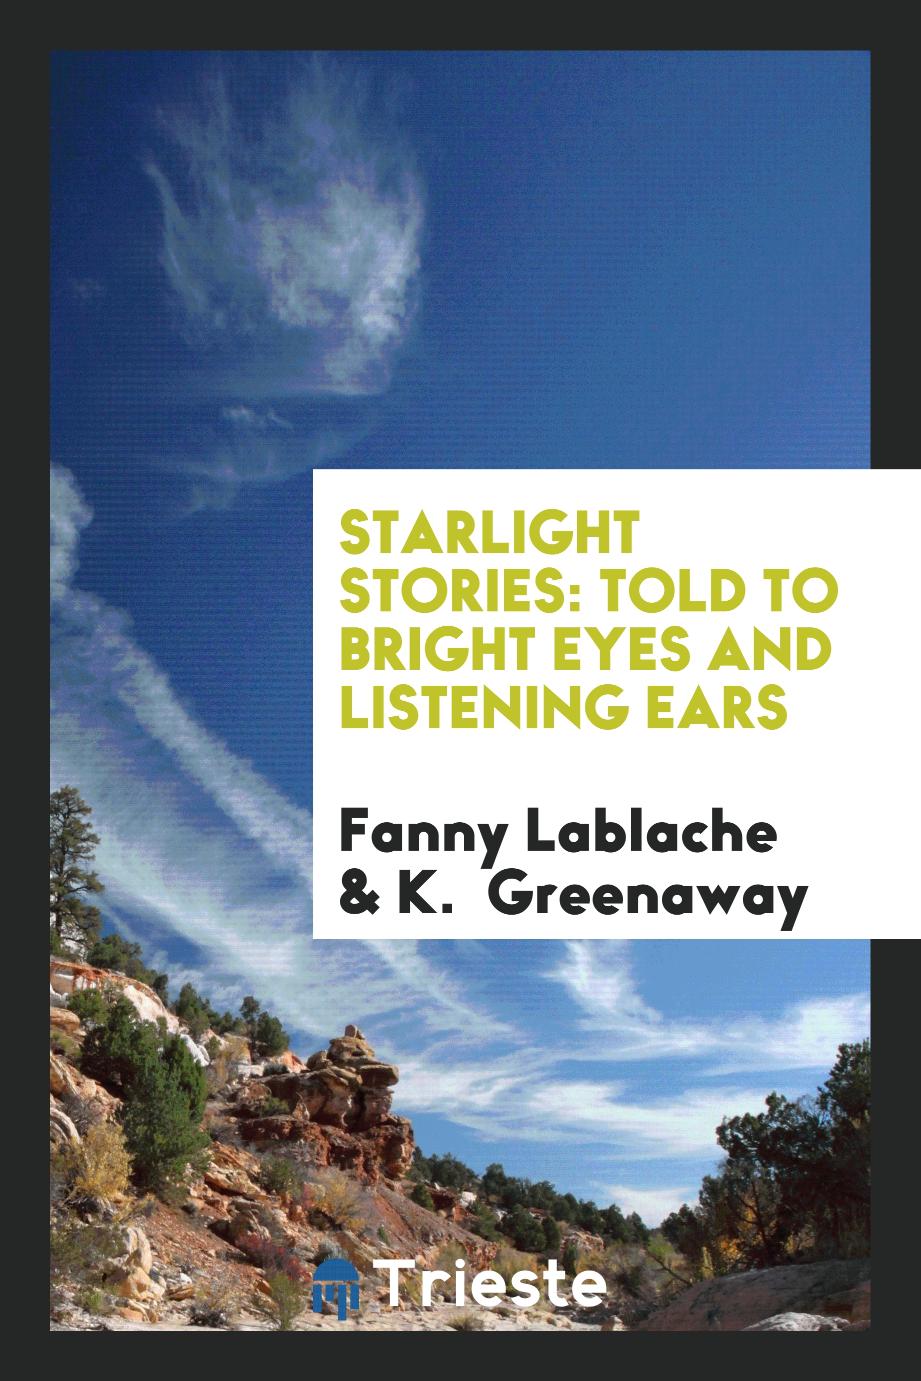 Starlight Stories: Told to Bright Eyes and Listening Ears